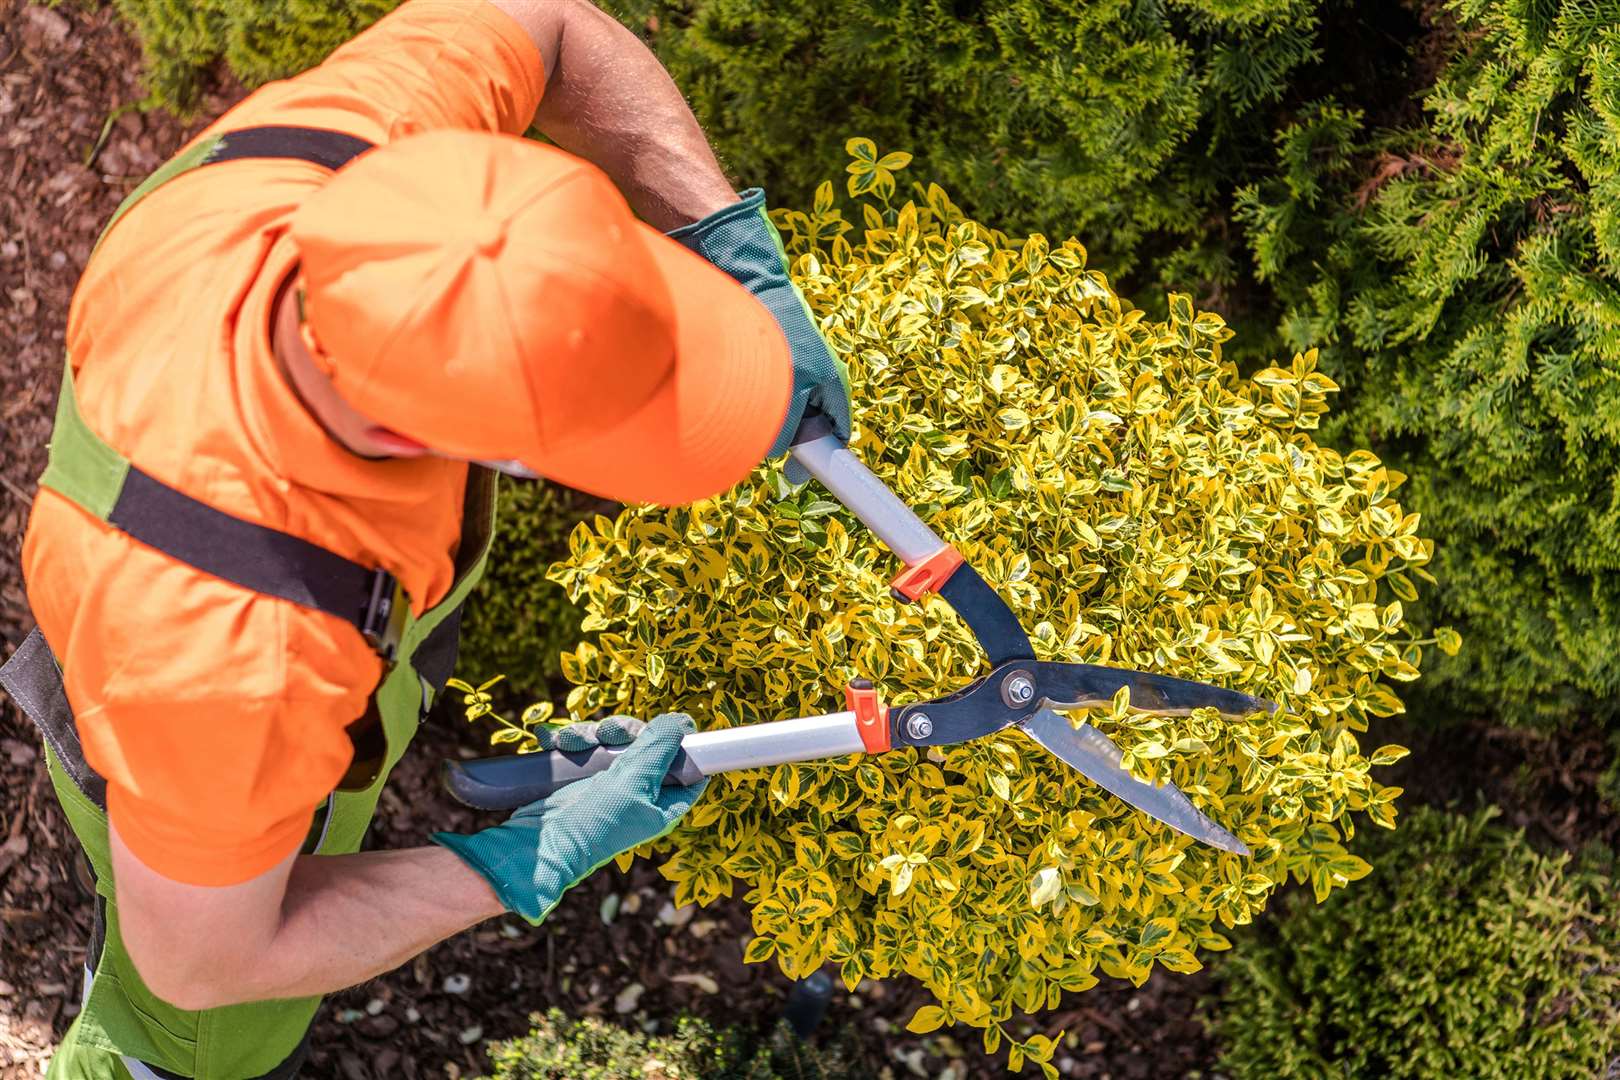 Consider your posture when pruning and trimming shrubs. Picture: iStock/PA